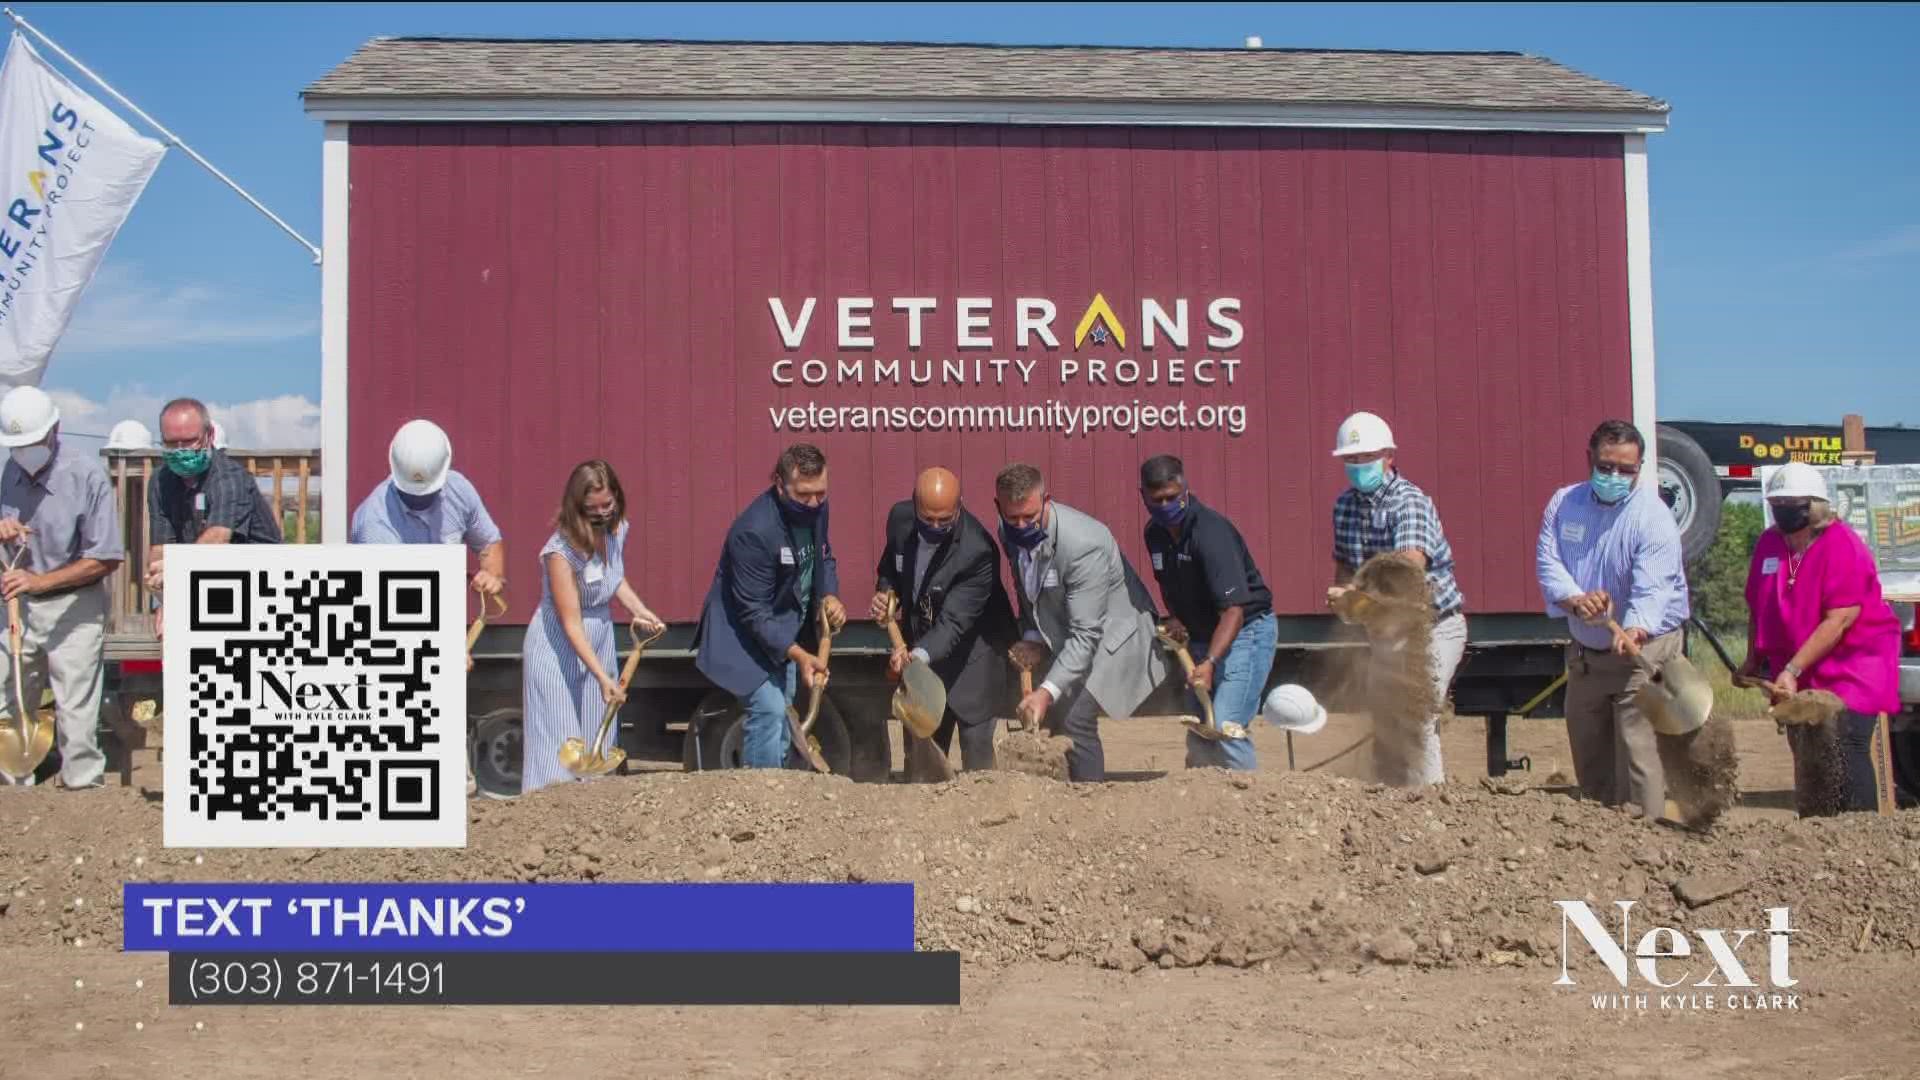 When construction finishes, this community in Longmont will give homeless veterans a place to live and provide them support to address root causes of homelessness.